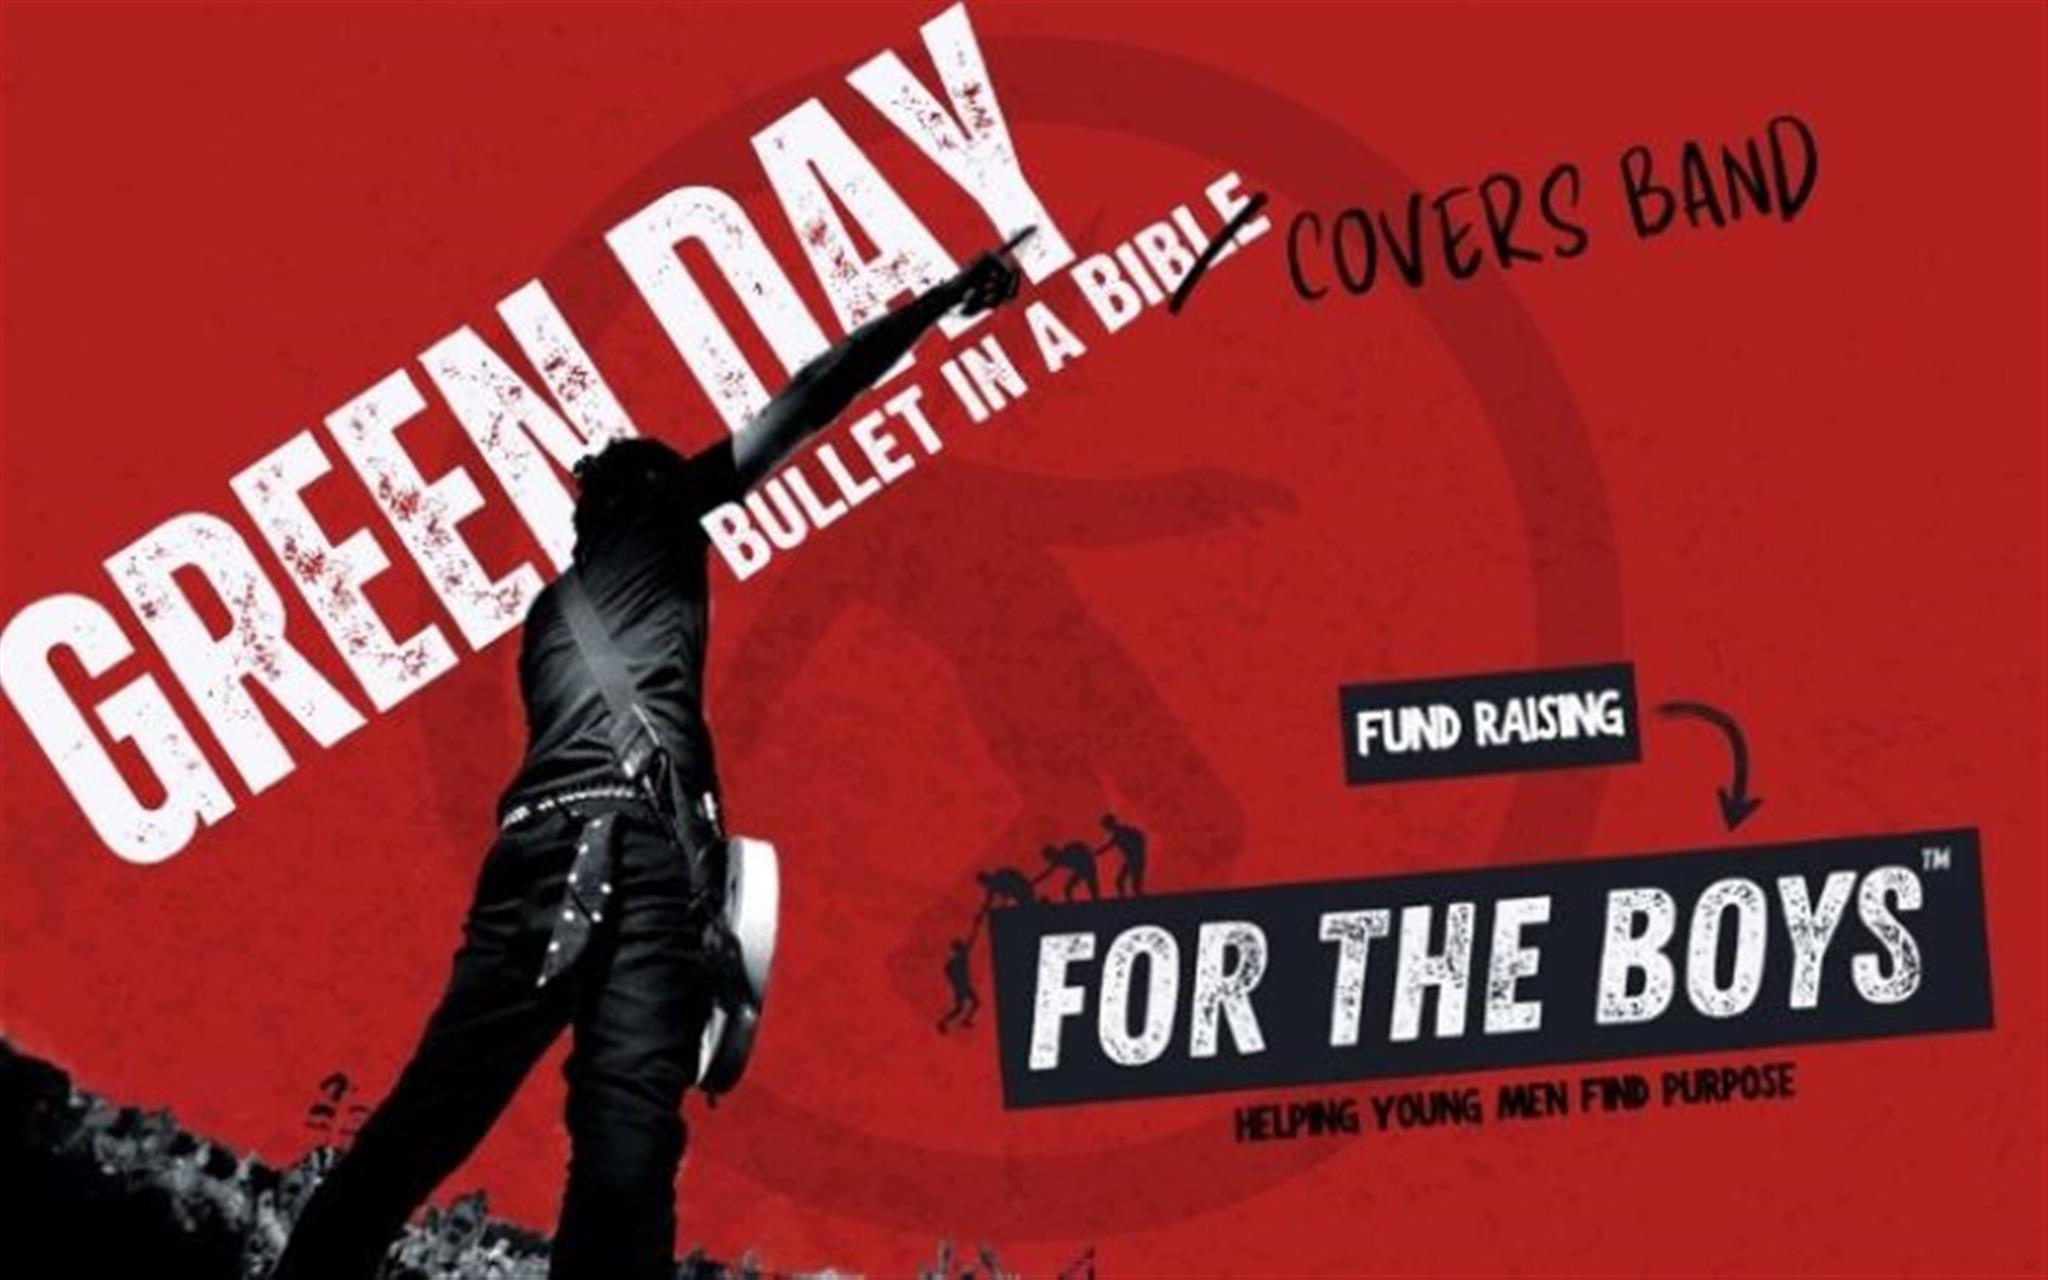 Green Day Night - Bullet in a Covers Band image